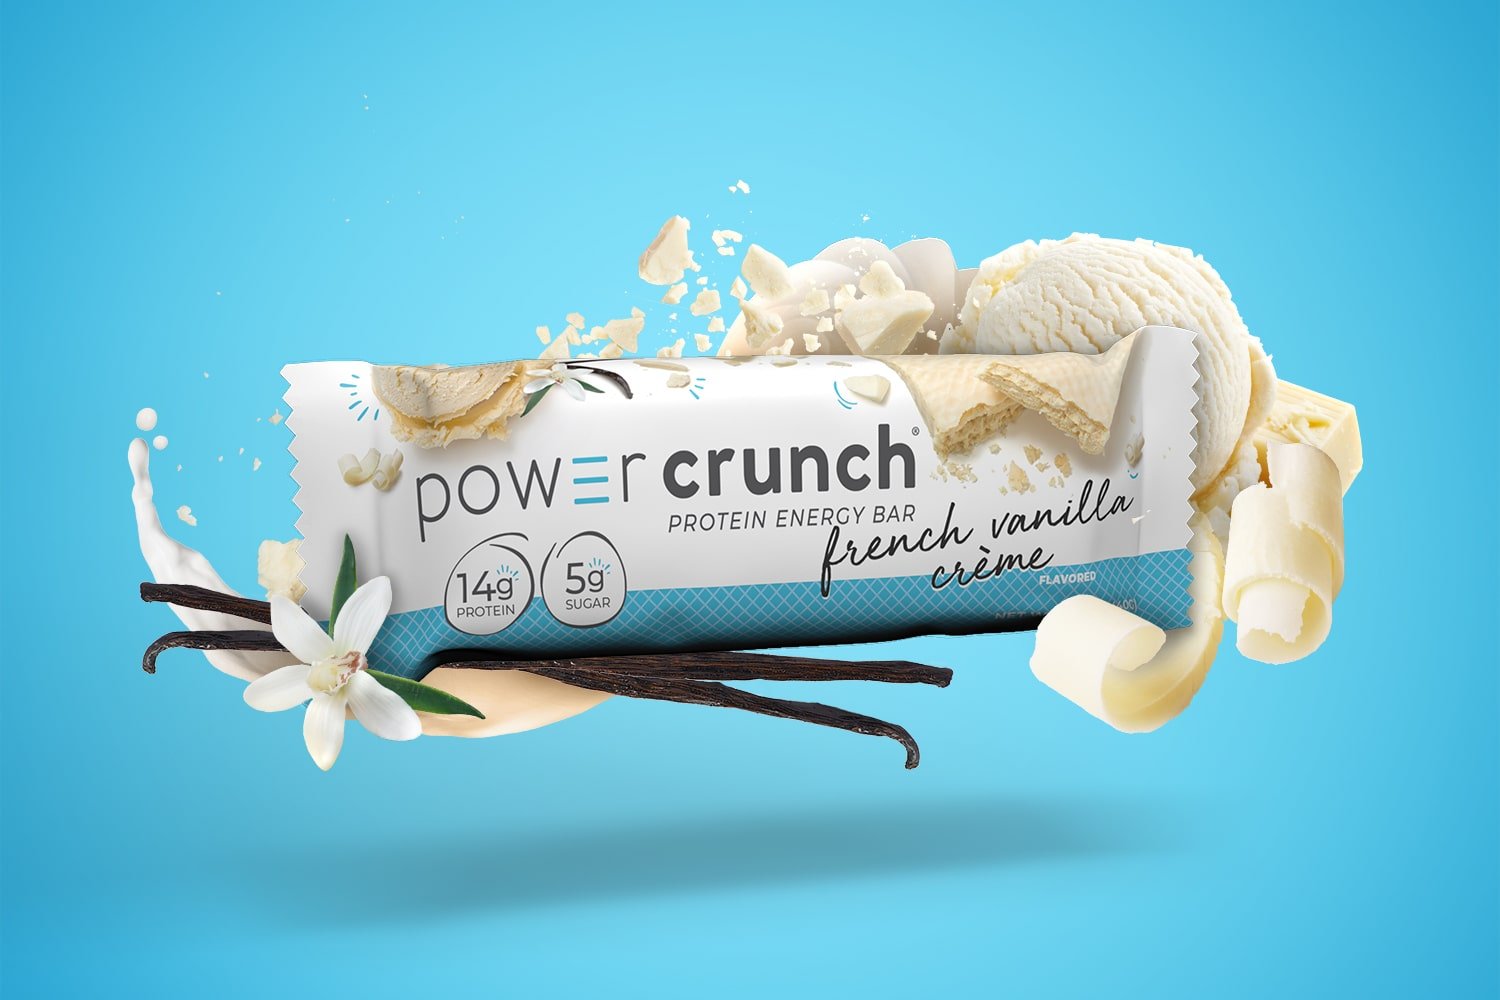 french vanilla protein bars pictured with vanilla flavor explosion